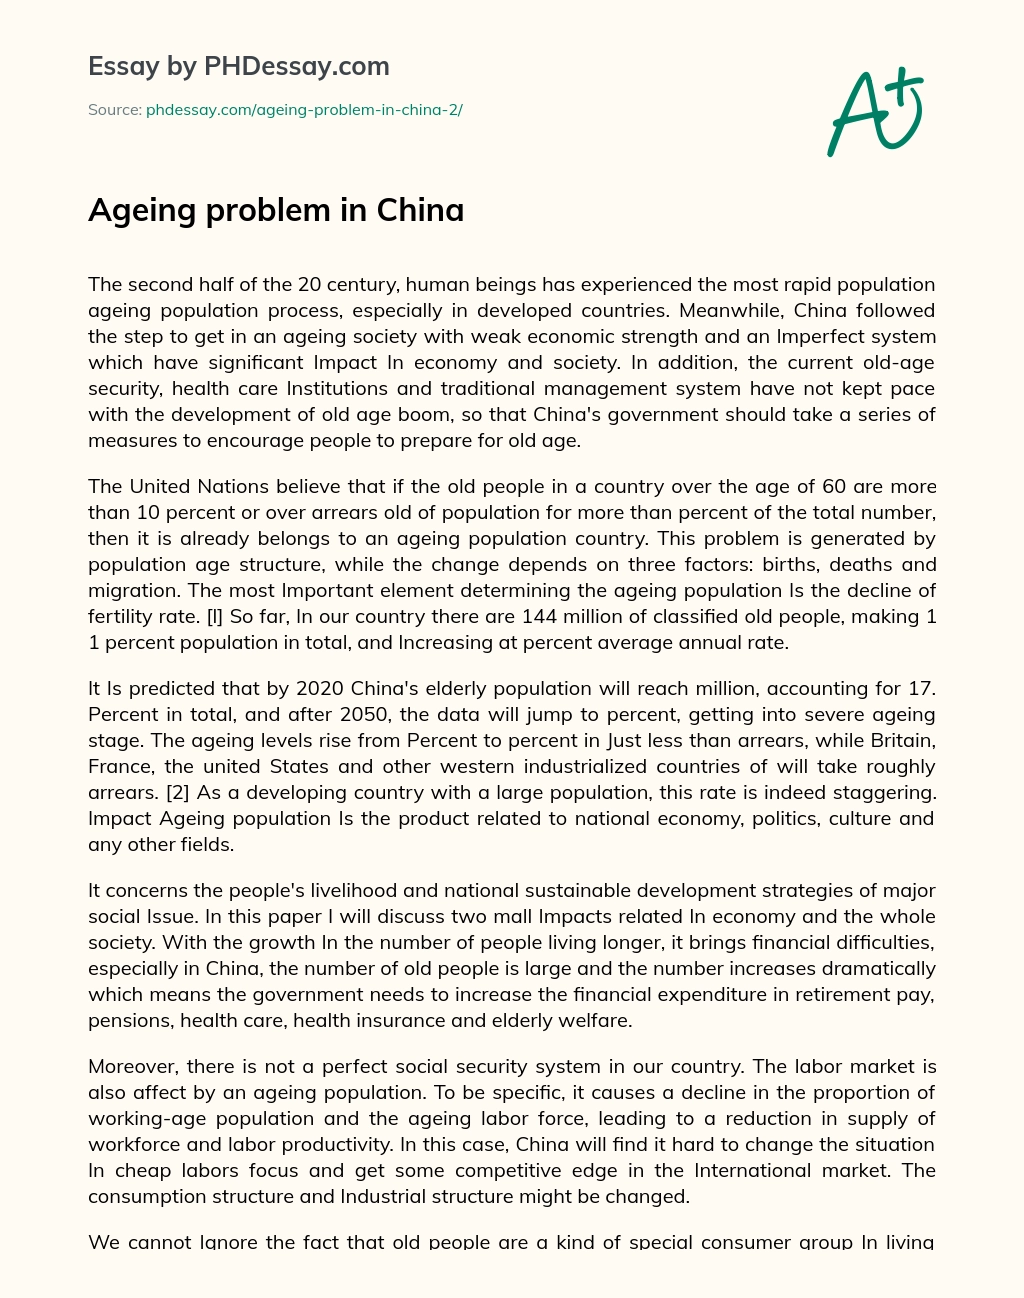 Ageing Problem in China essay